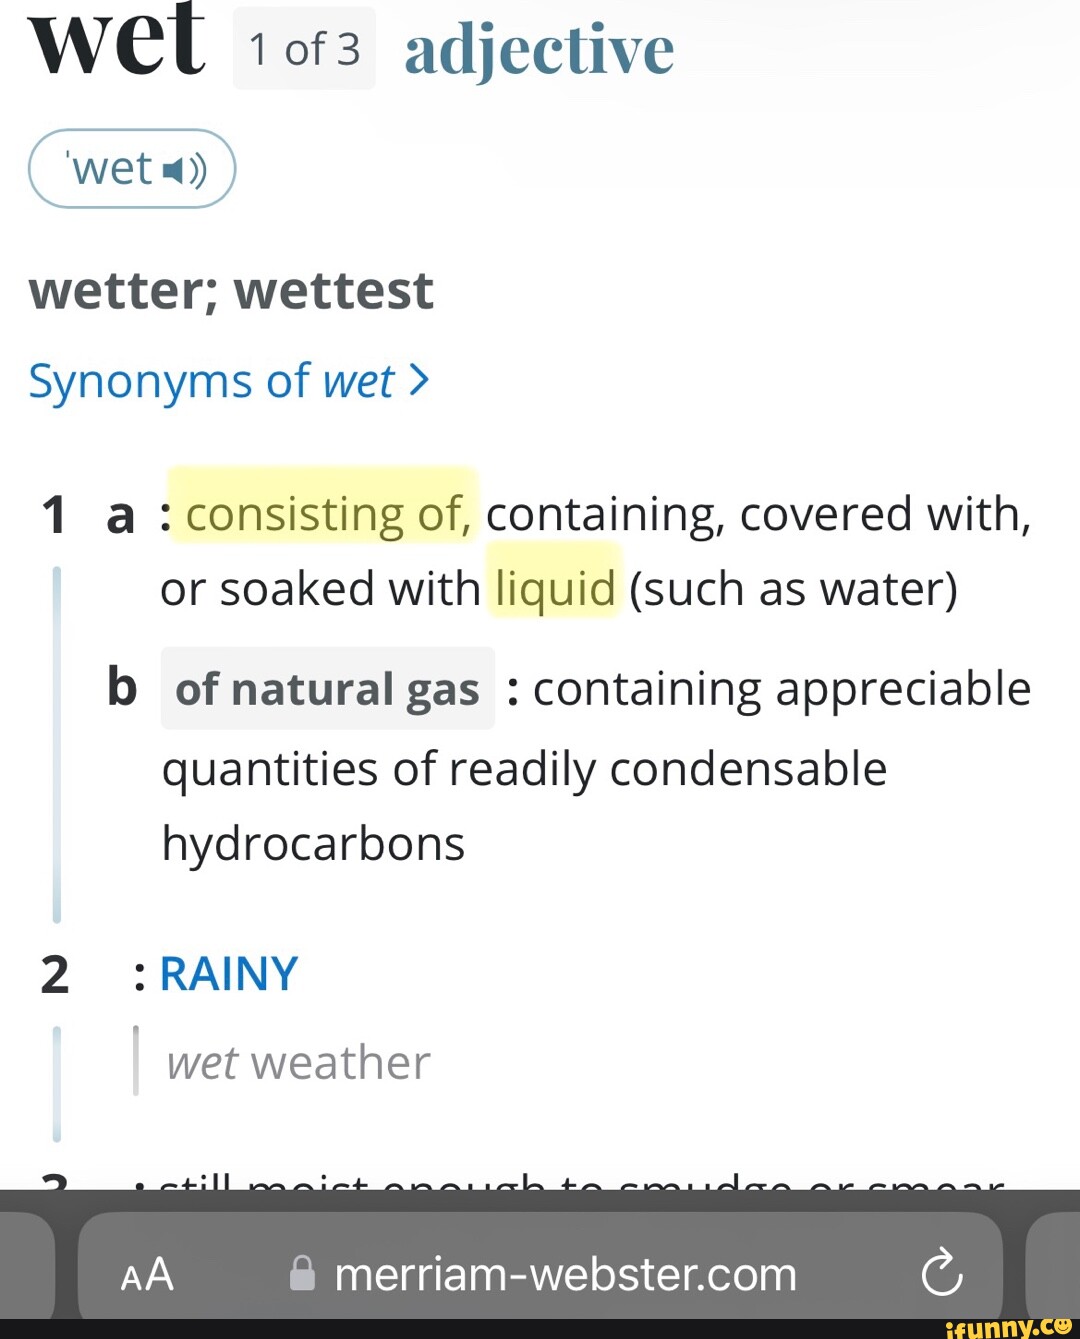 WEL adjective 'wet 4) wetter; wettest Synonyms of wet > 1 a: consisting synonyms of wetter” title=”WEL adjective ‘wet 4) wetter; wettest Synonyms of wet > 1 a: consisting” width=”500″ height=”600″><br />synonyms of wetter WEL adjective ‘wet 4) wetter; wettest Synonyms of wet > 1 a: consisting</p>
</p>
</div>
<p>The post <a rel=